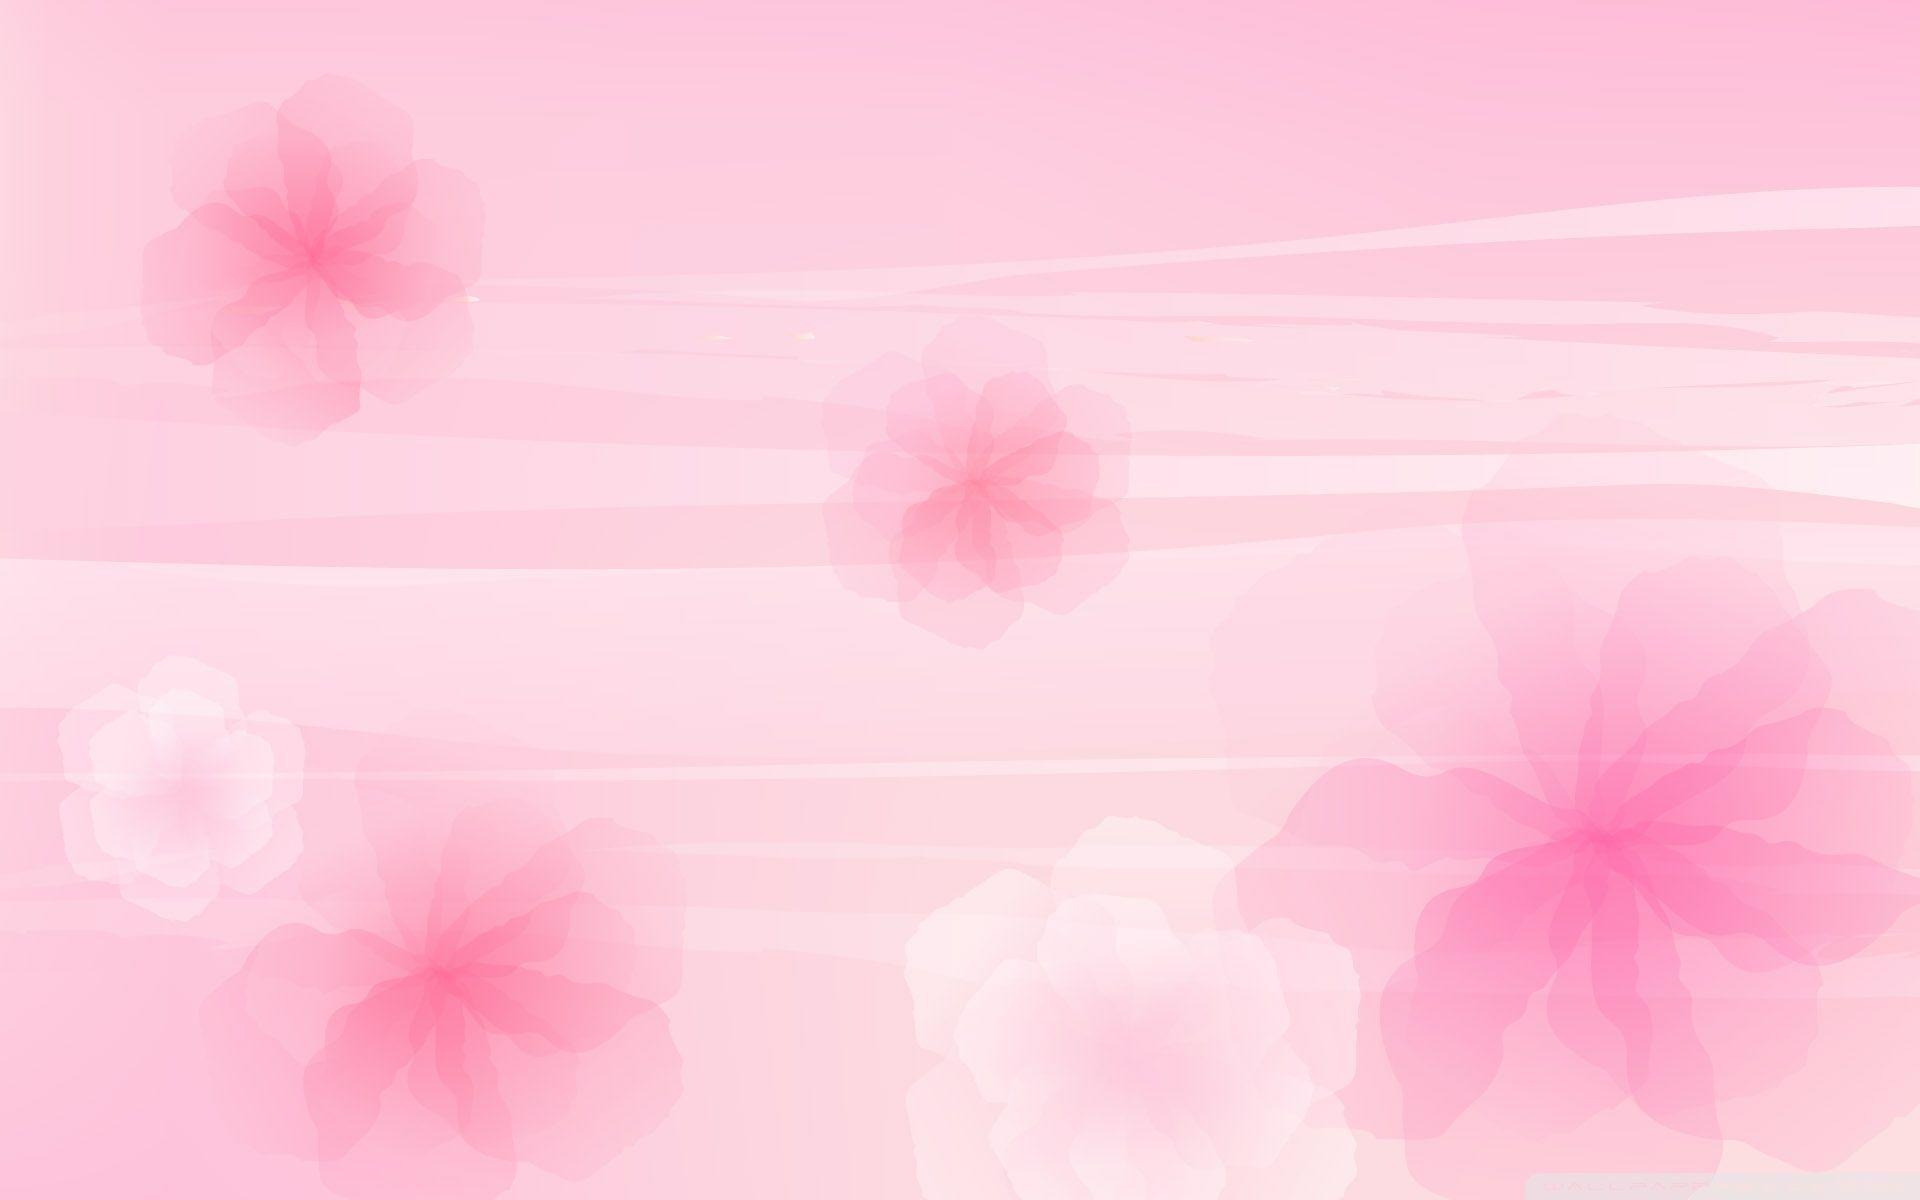 Backgrounds Pink